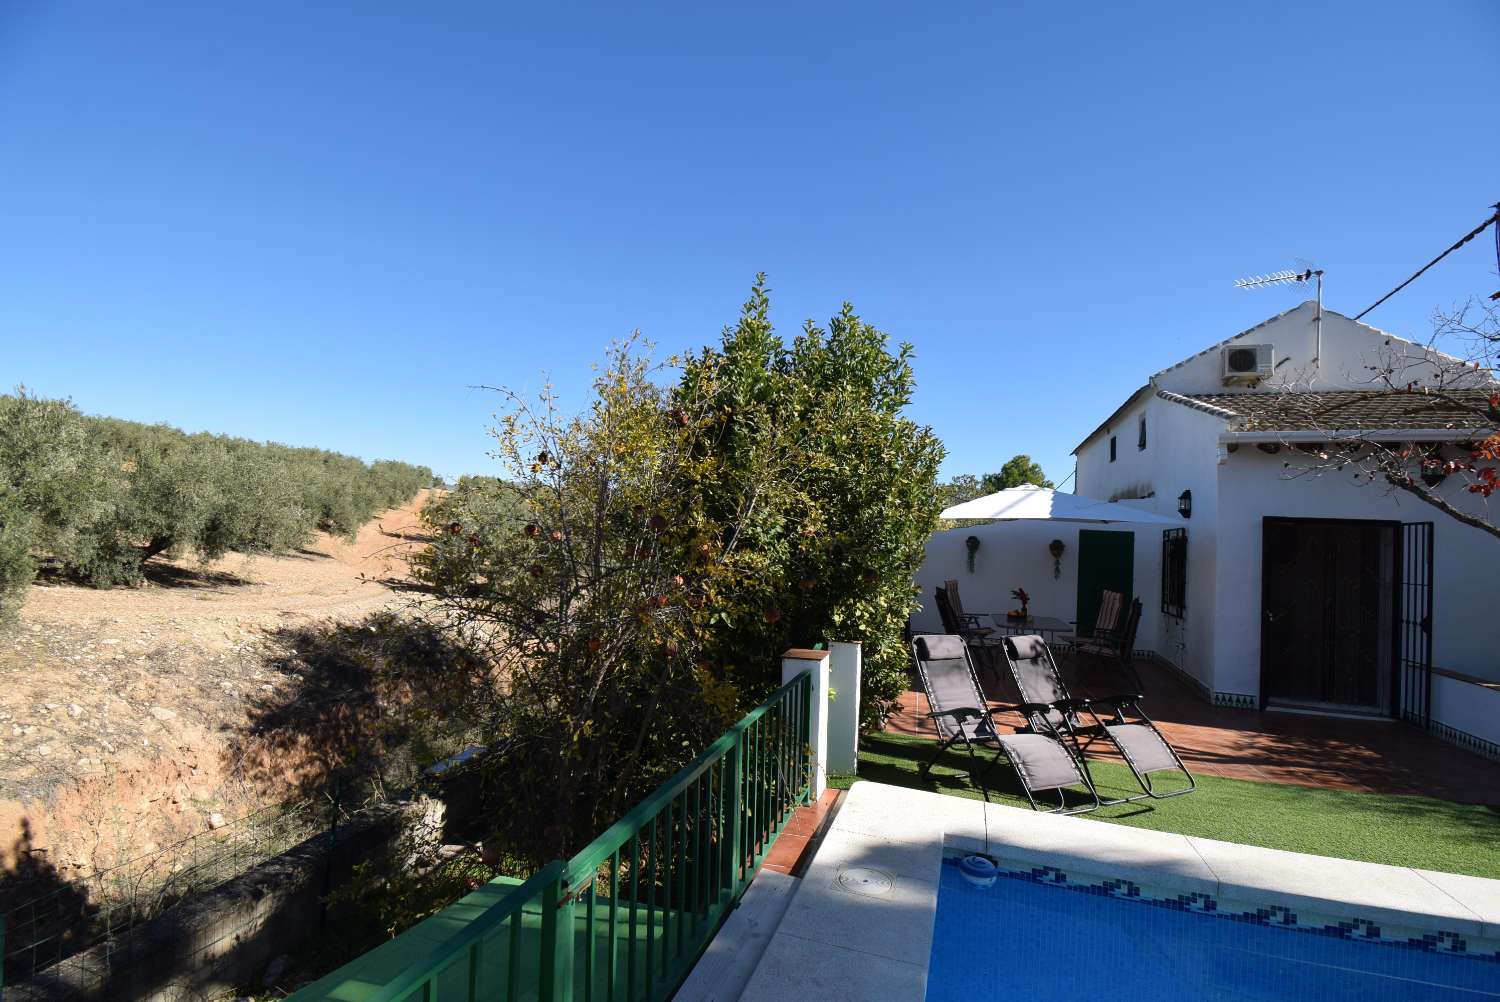 Lovely cottage with pool, garden and nice views